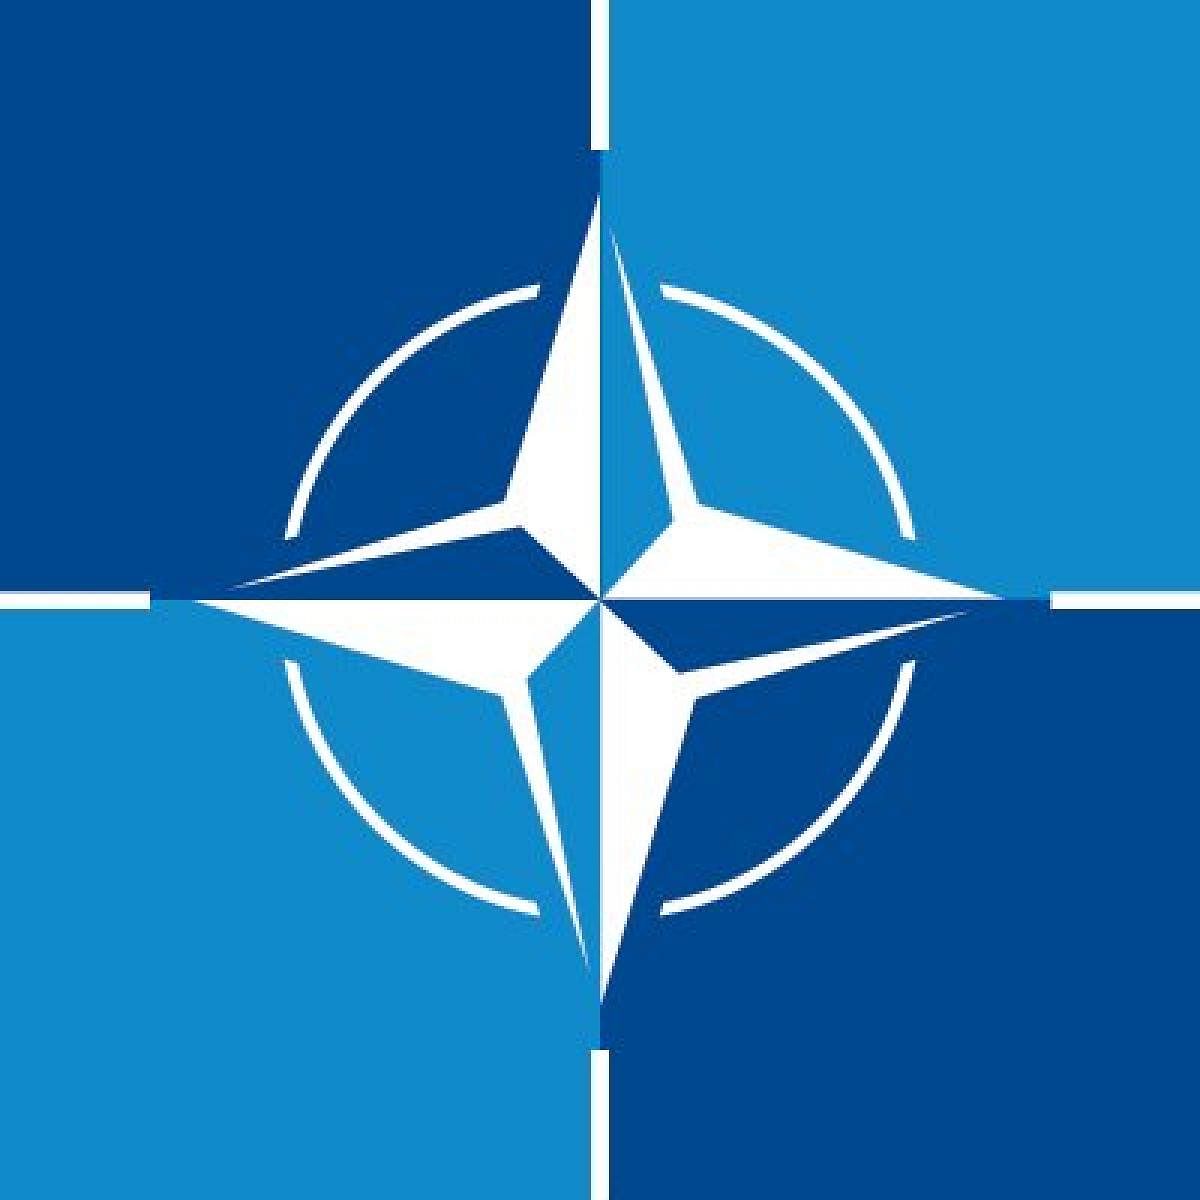 "All allies have agreed to a new cost-sharing formula. Under the new formula, cost shares attributed to most European allies and Canada will go up, while the US share will come down," a NATO official said. Photo (Twitter @NATO)